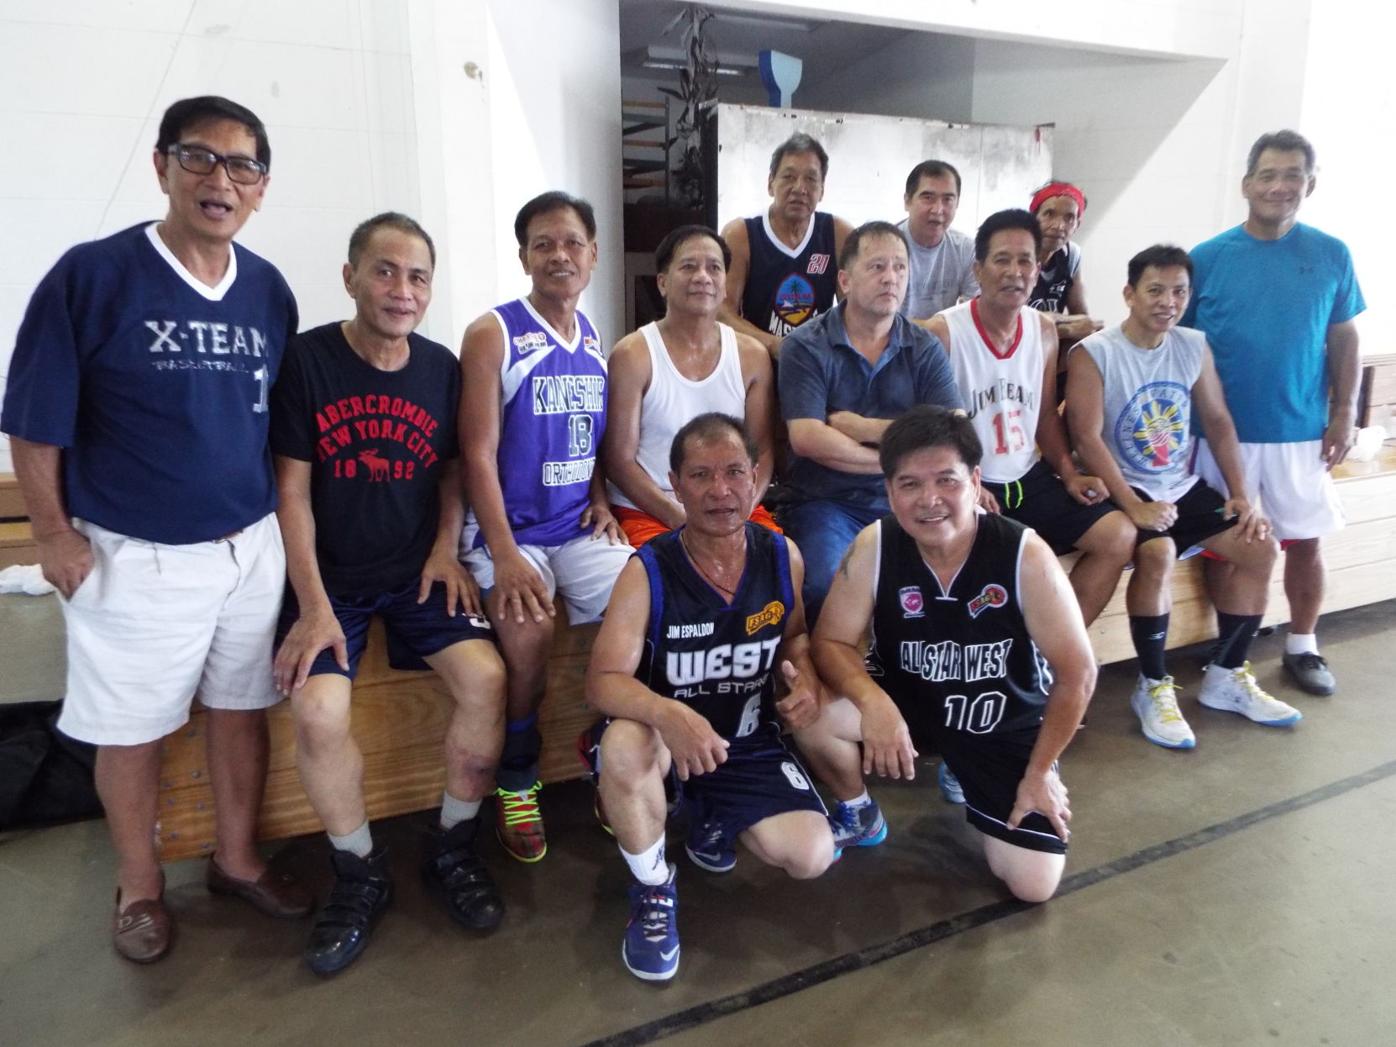 FIL-AM HELPS PHILIPPINE YOUTH BASKETBALL TEAM TO PARTICIPATE IN APRIL 5TH *  6TH GOODWILL GAMES IN NORTH SAN DIEGO COUNTY